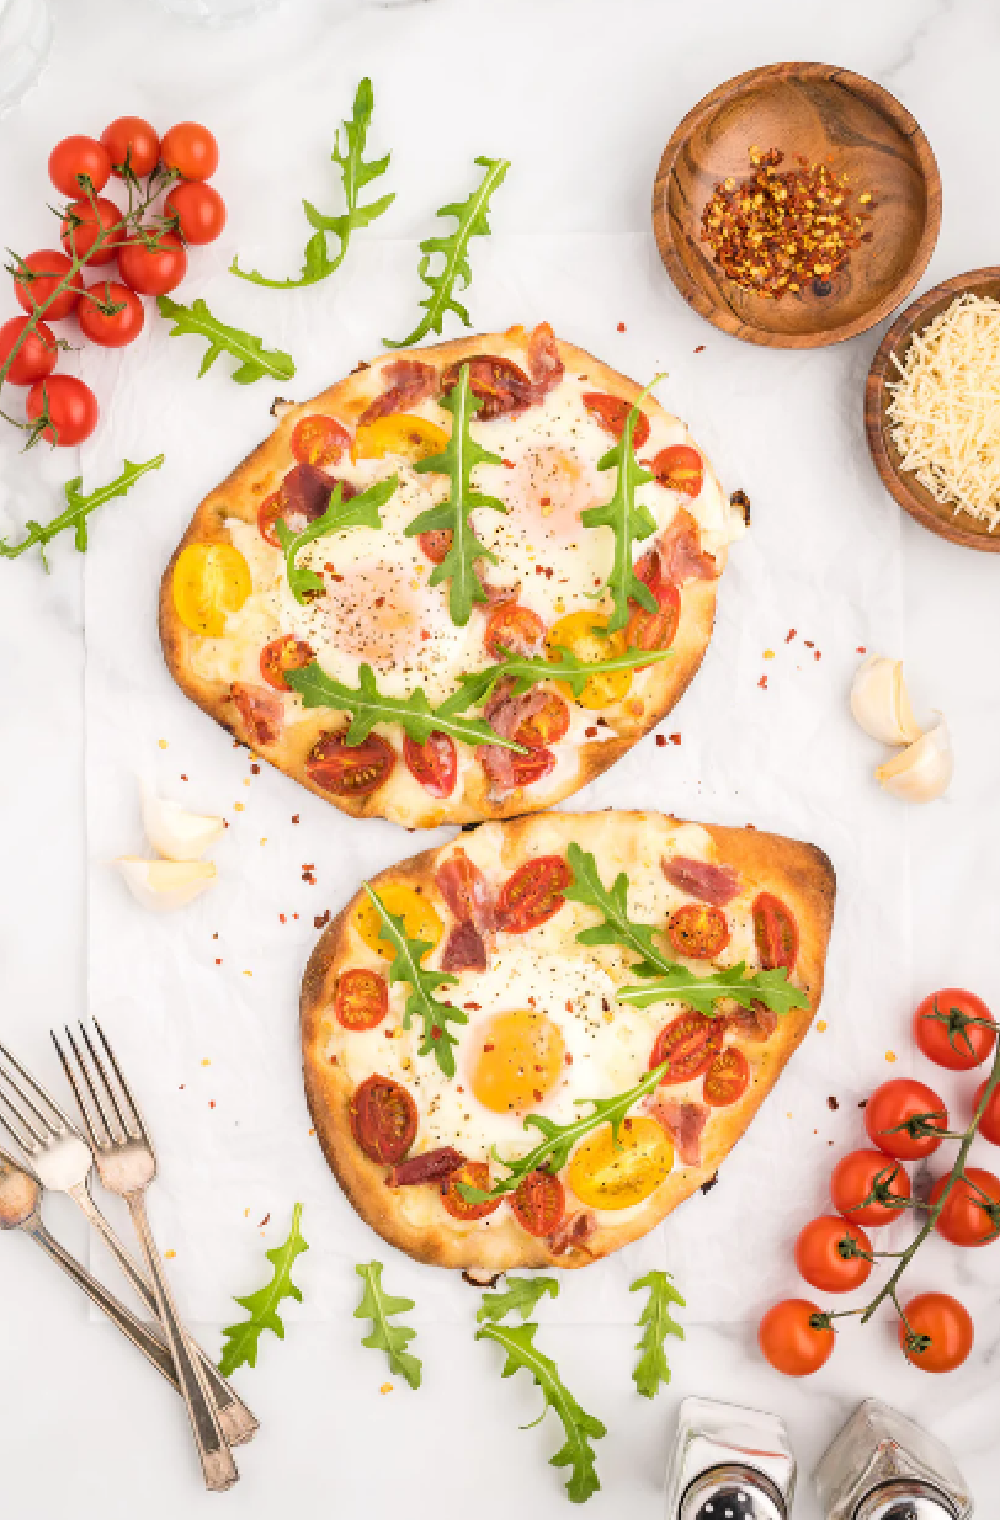 Flatbread Breakfast Pizza with a fried egg, cherry tomatoes and arugula